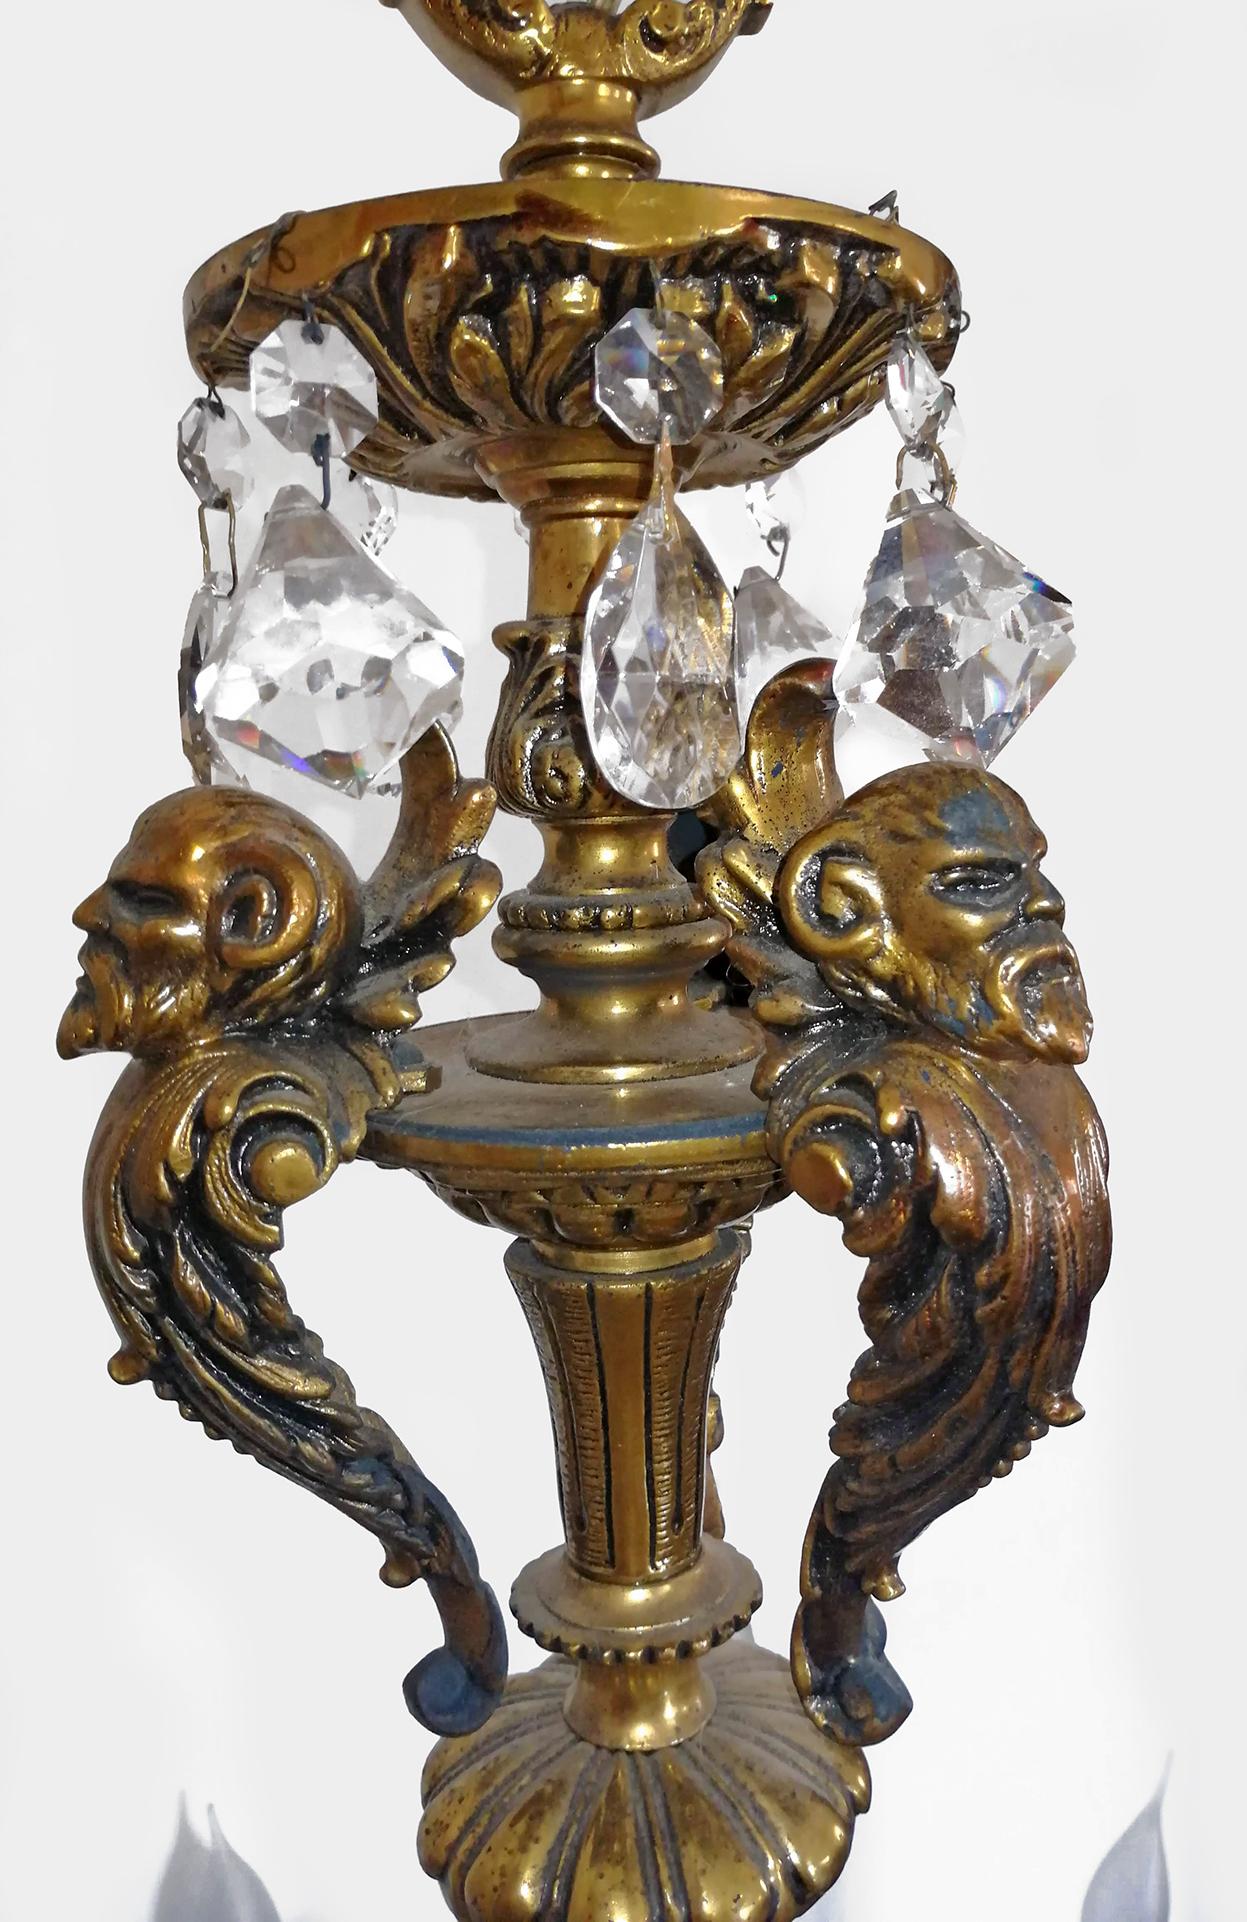 Carved Massive French Louis XV Baroque Gilt Bronze 12-Light Chandelier, 19th Century For Sale